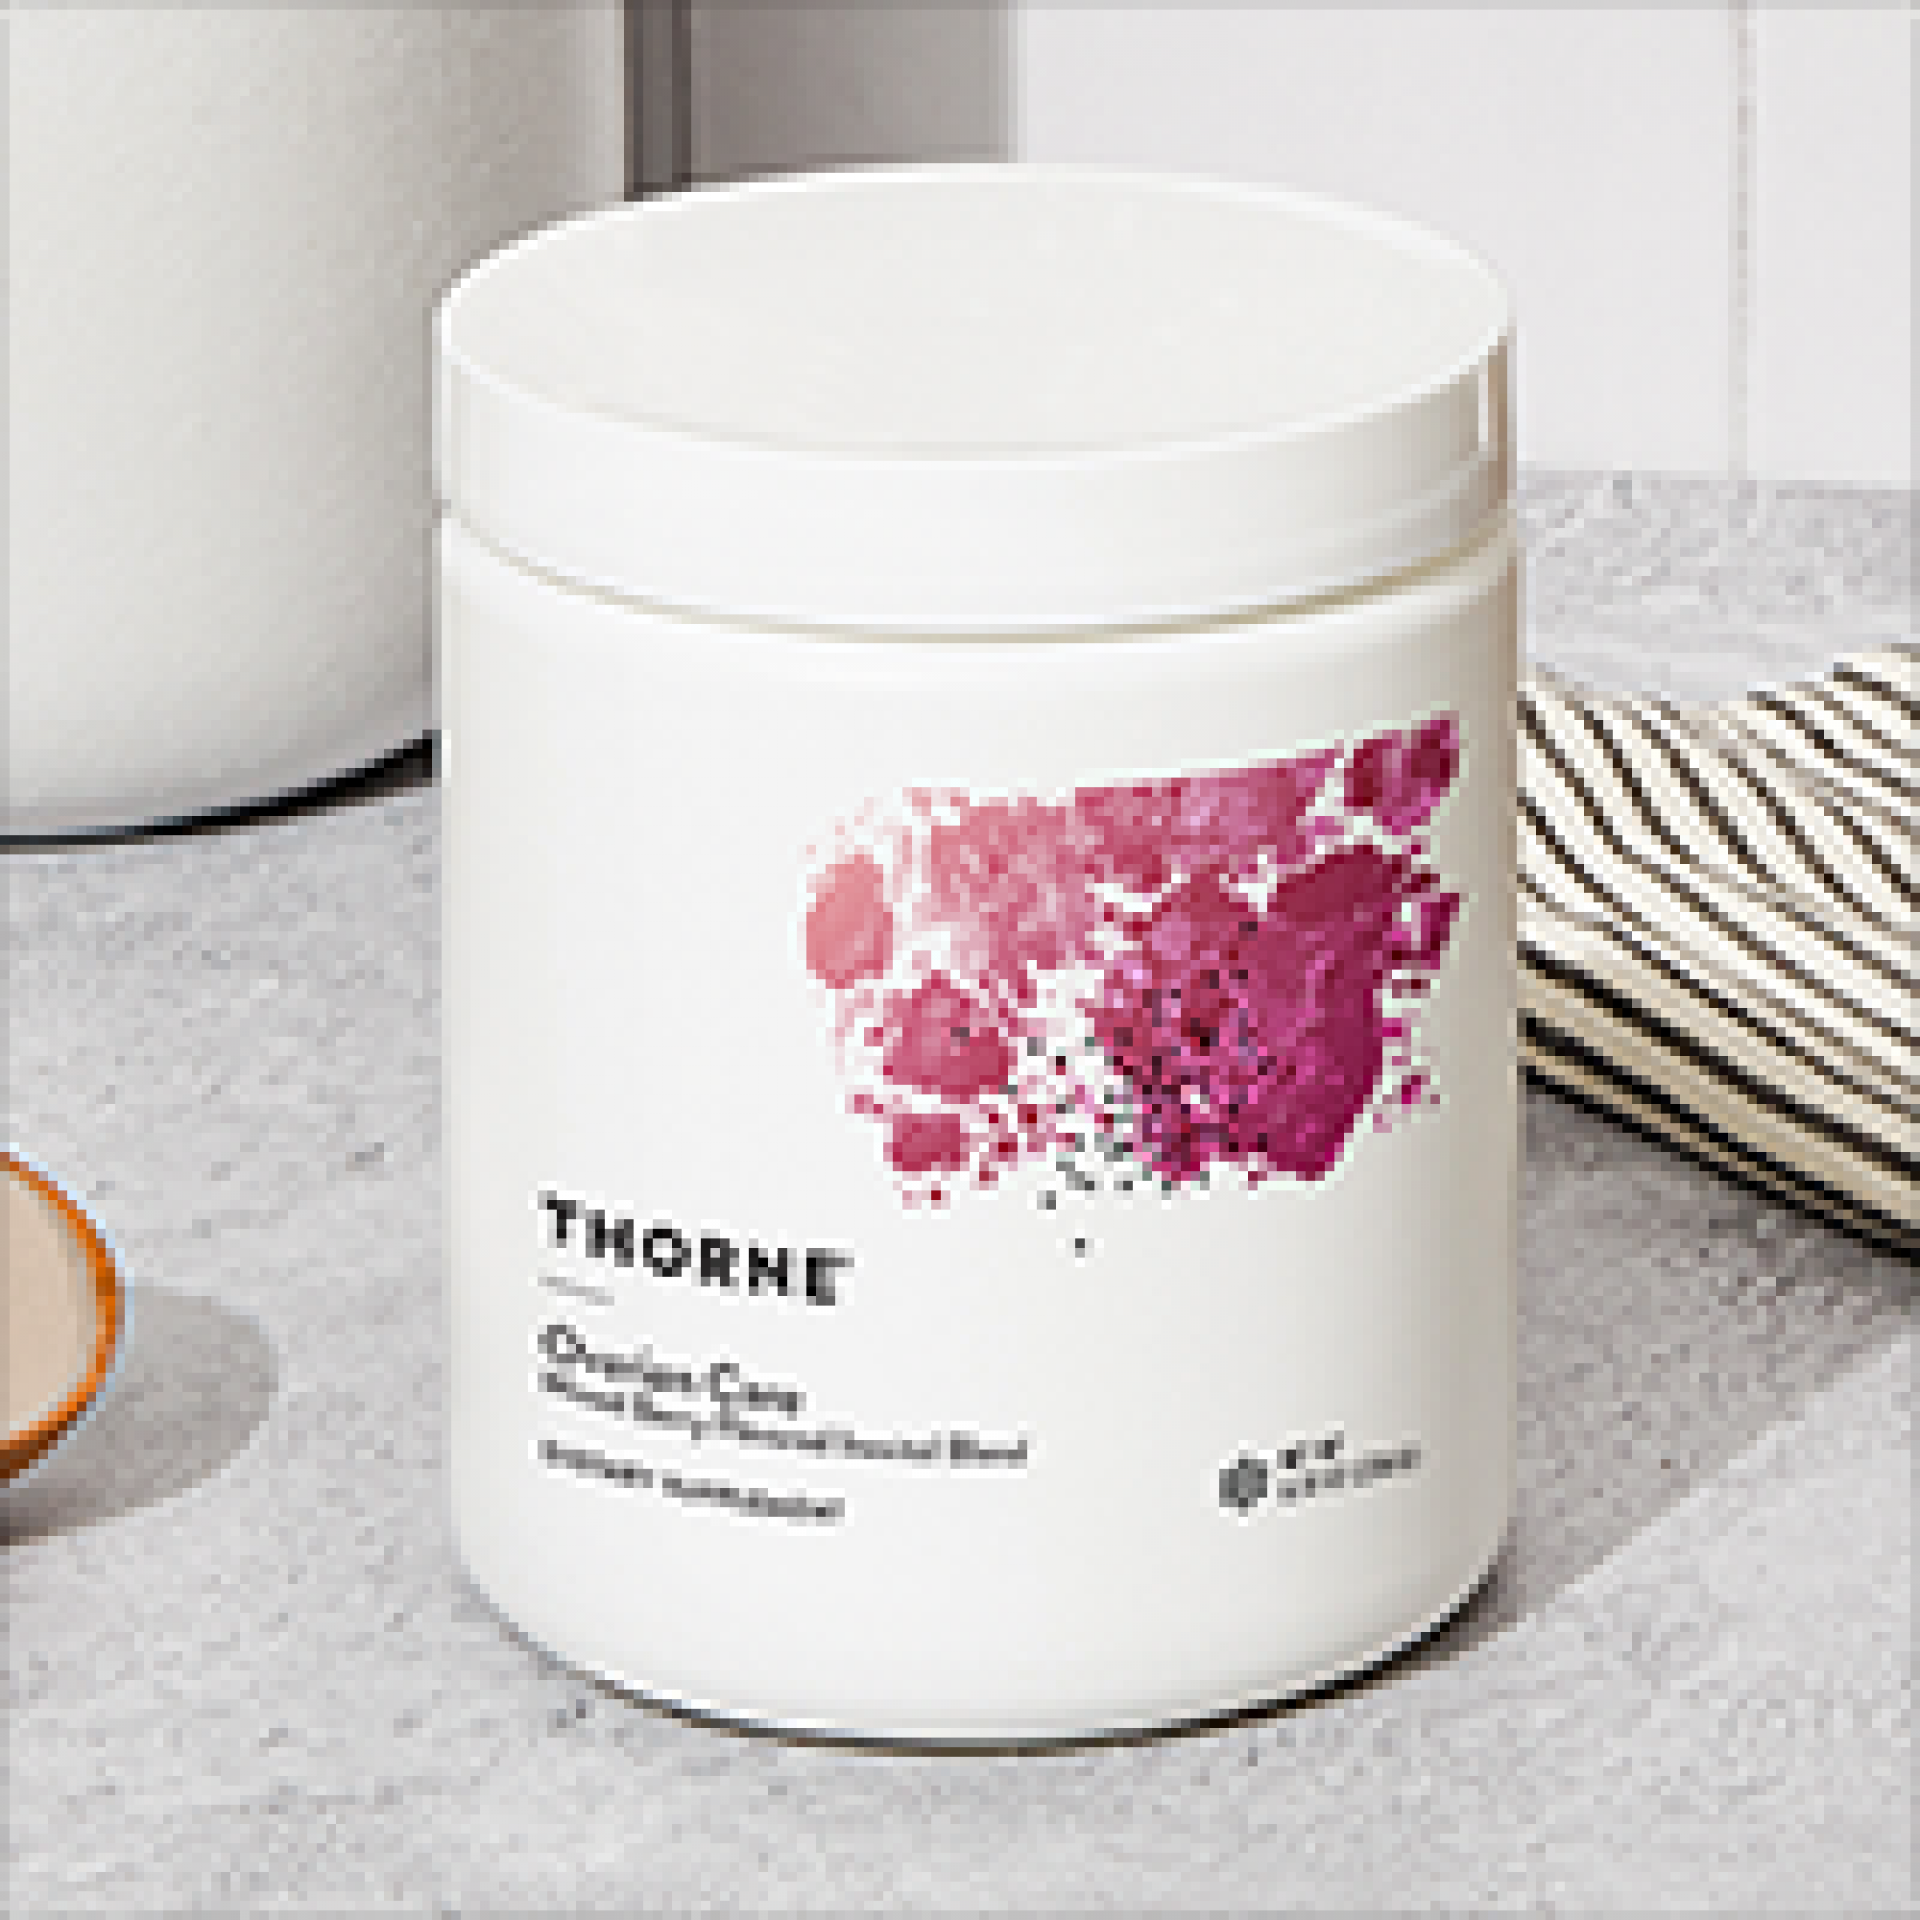 Thorne HealthTech – Empowering individuals to live healthier longer through personalized scientific wellness